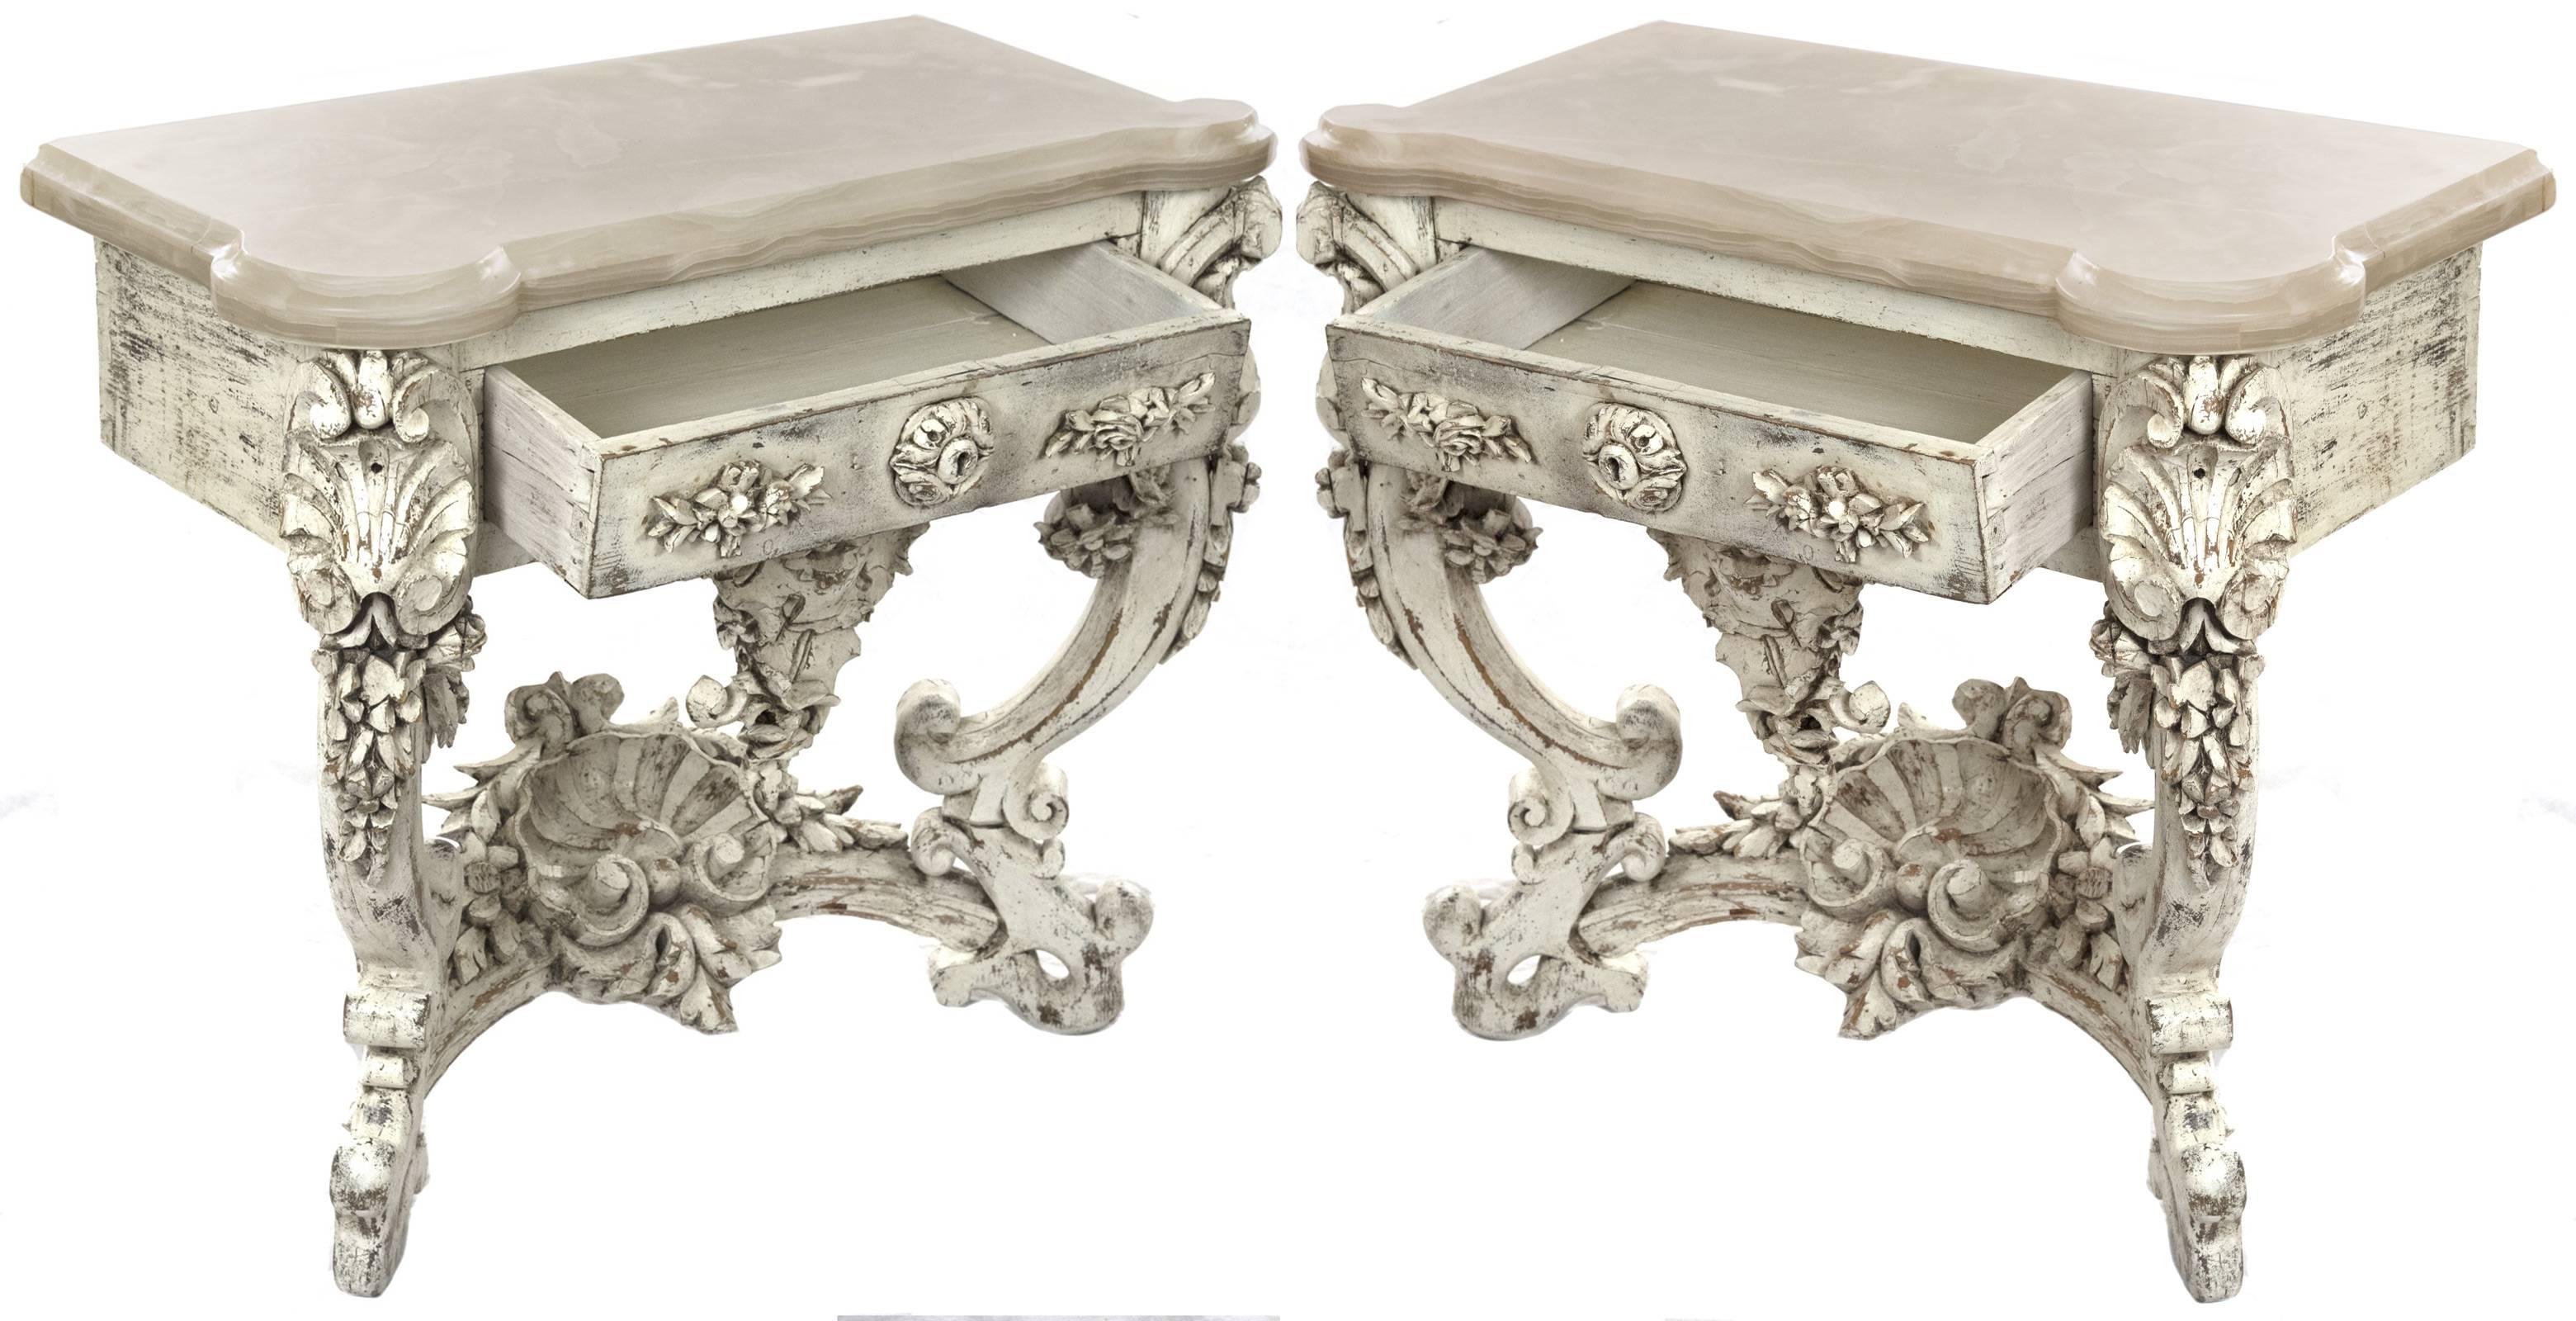 An elegant pair of early 19th century Louis XV style end tables hand-carved from solidwood and painted white. Each piece is raised on square feet and supported on scrolled legs with impressive rich floral carvings, connected by a conforming